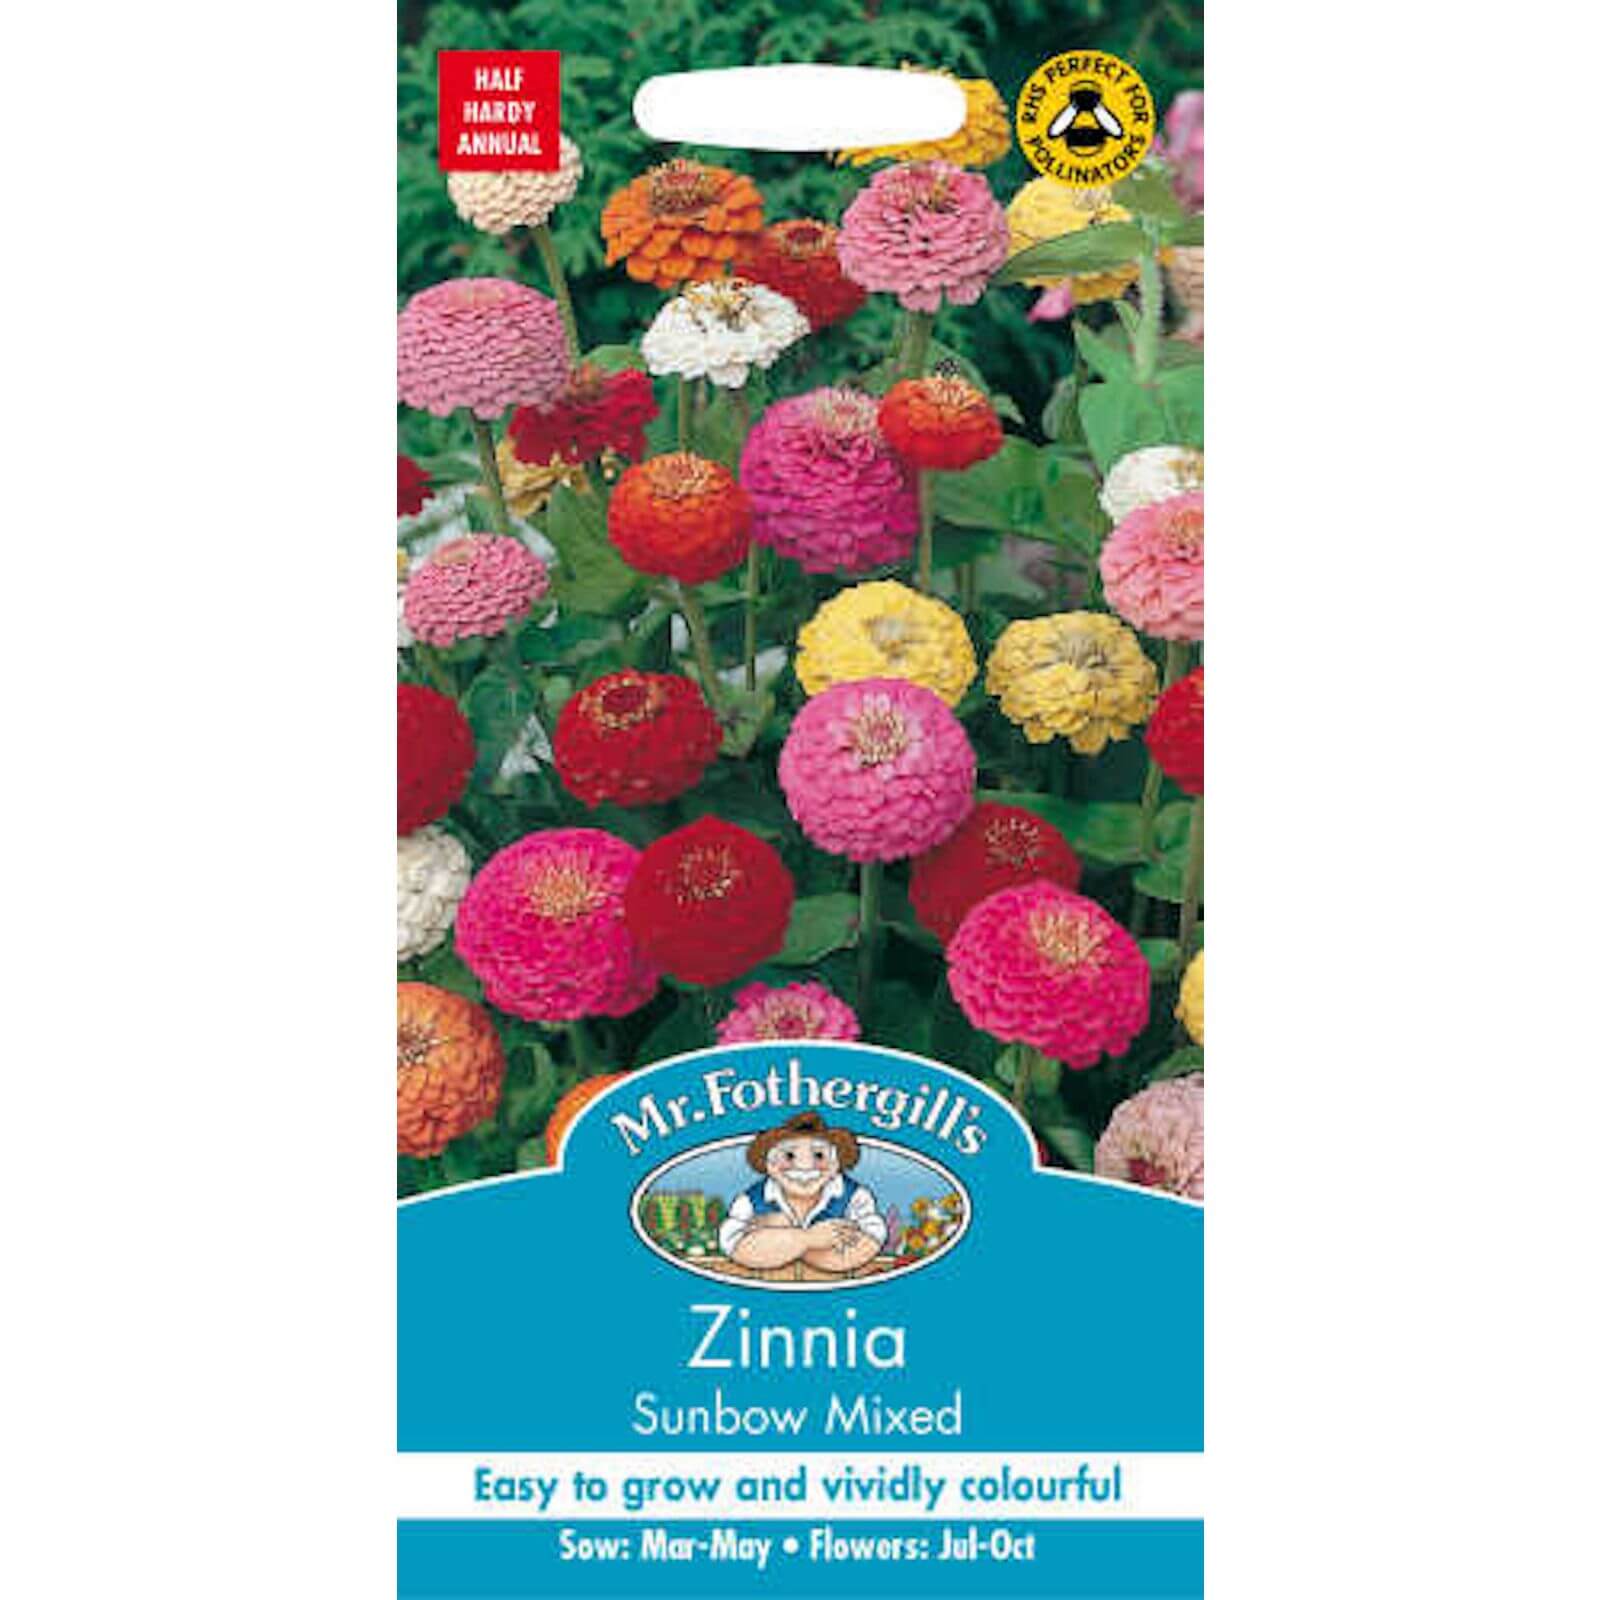 Mr. Fothergill's Zinnia Sunbow Mixed Seeds